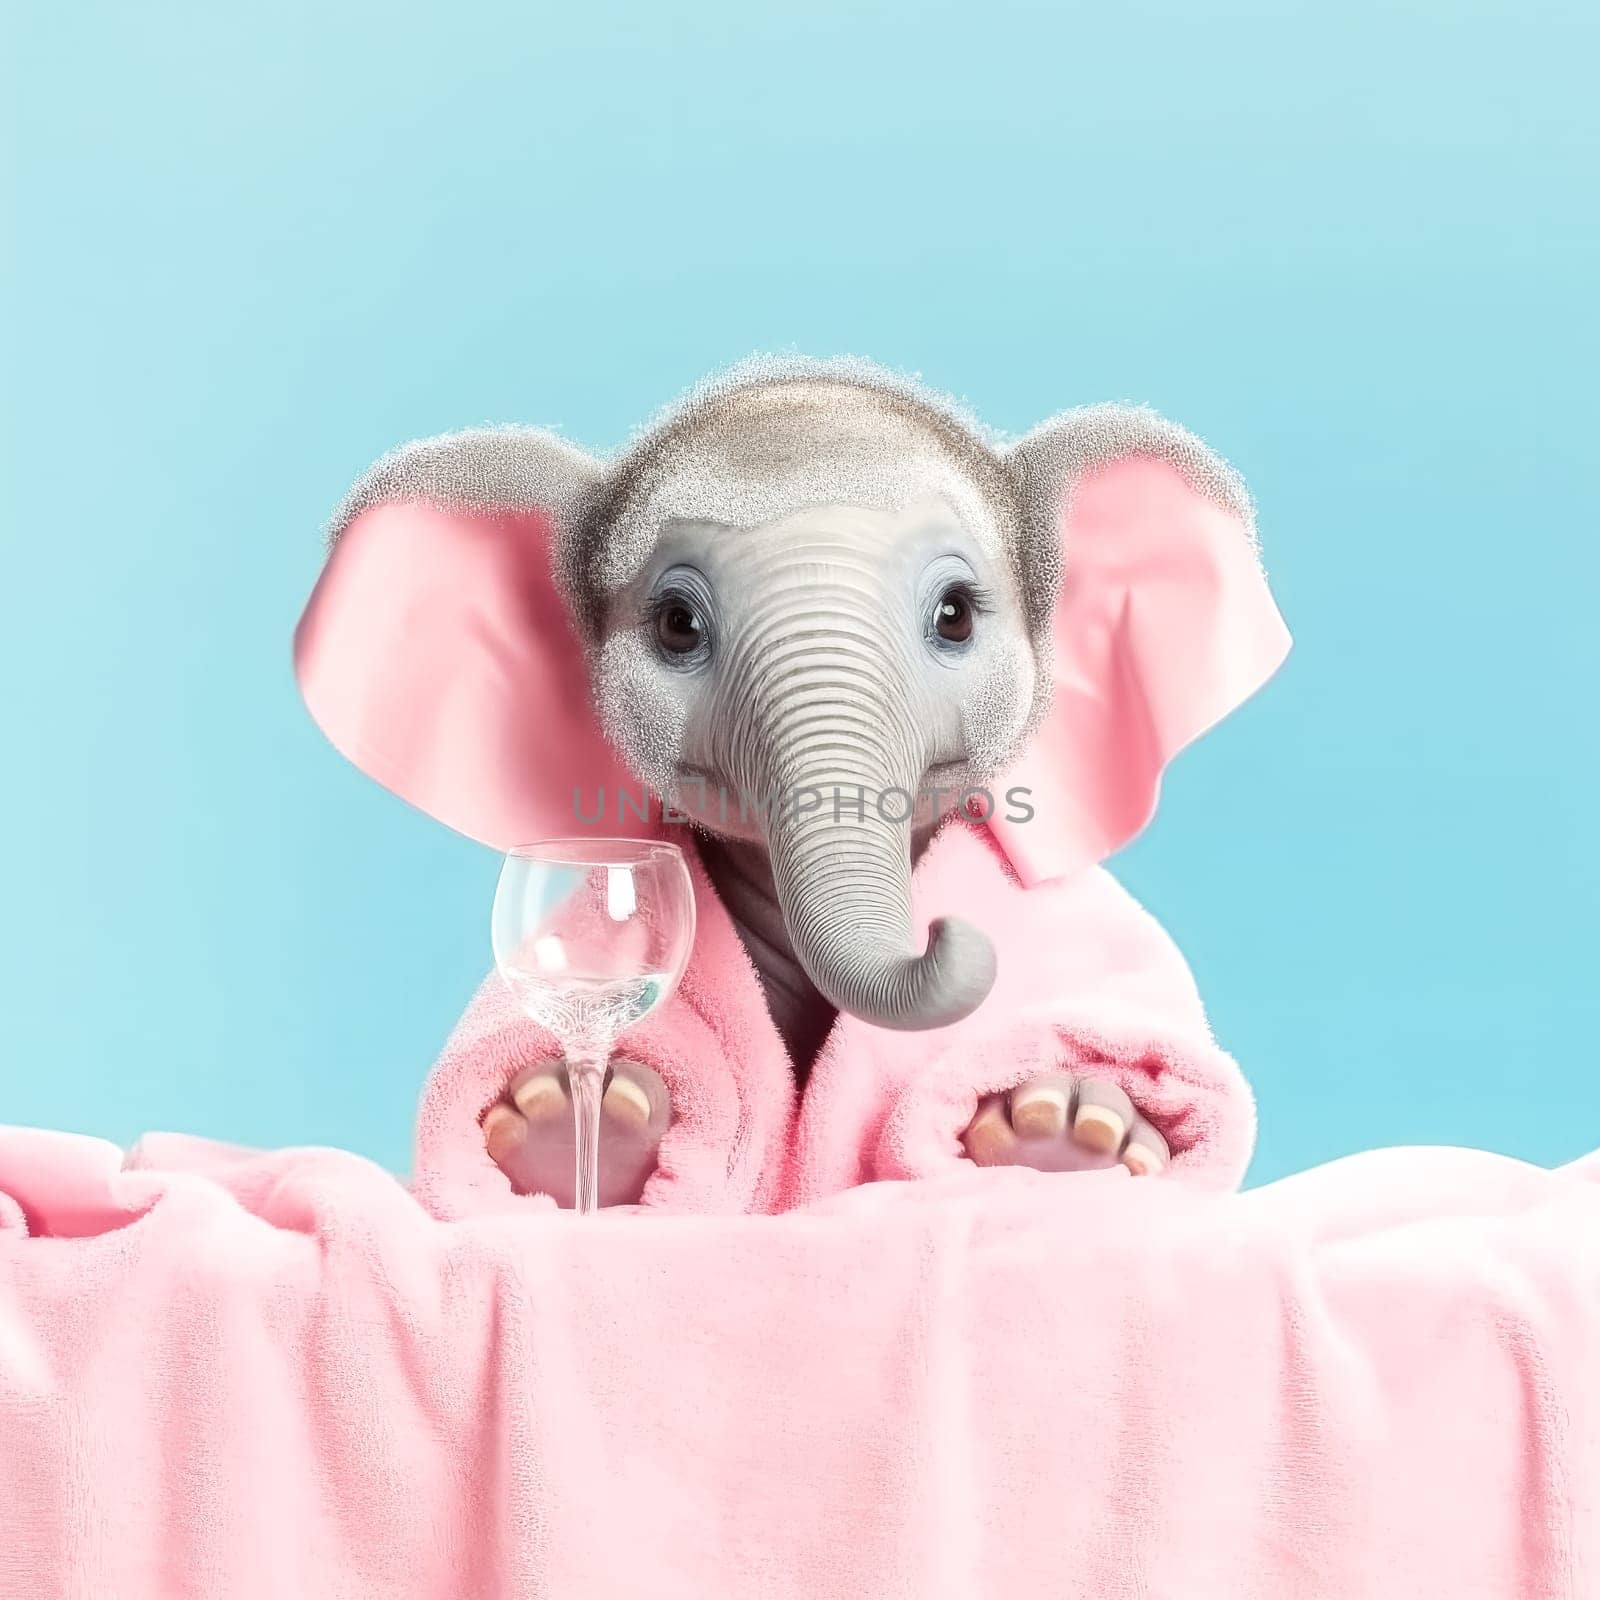 A baby elephant wrapped in a pink towel after a bath, encircled by soap bubbles, presenting a charming and adorable scene.